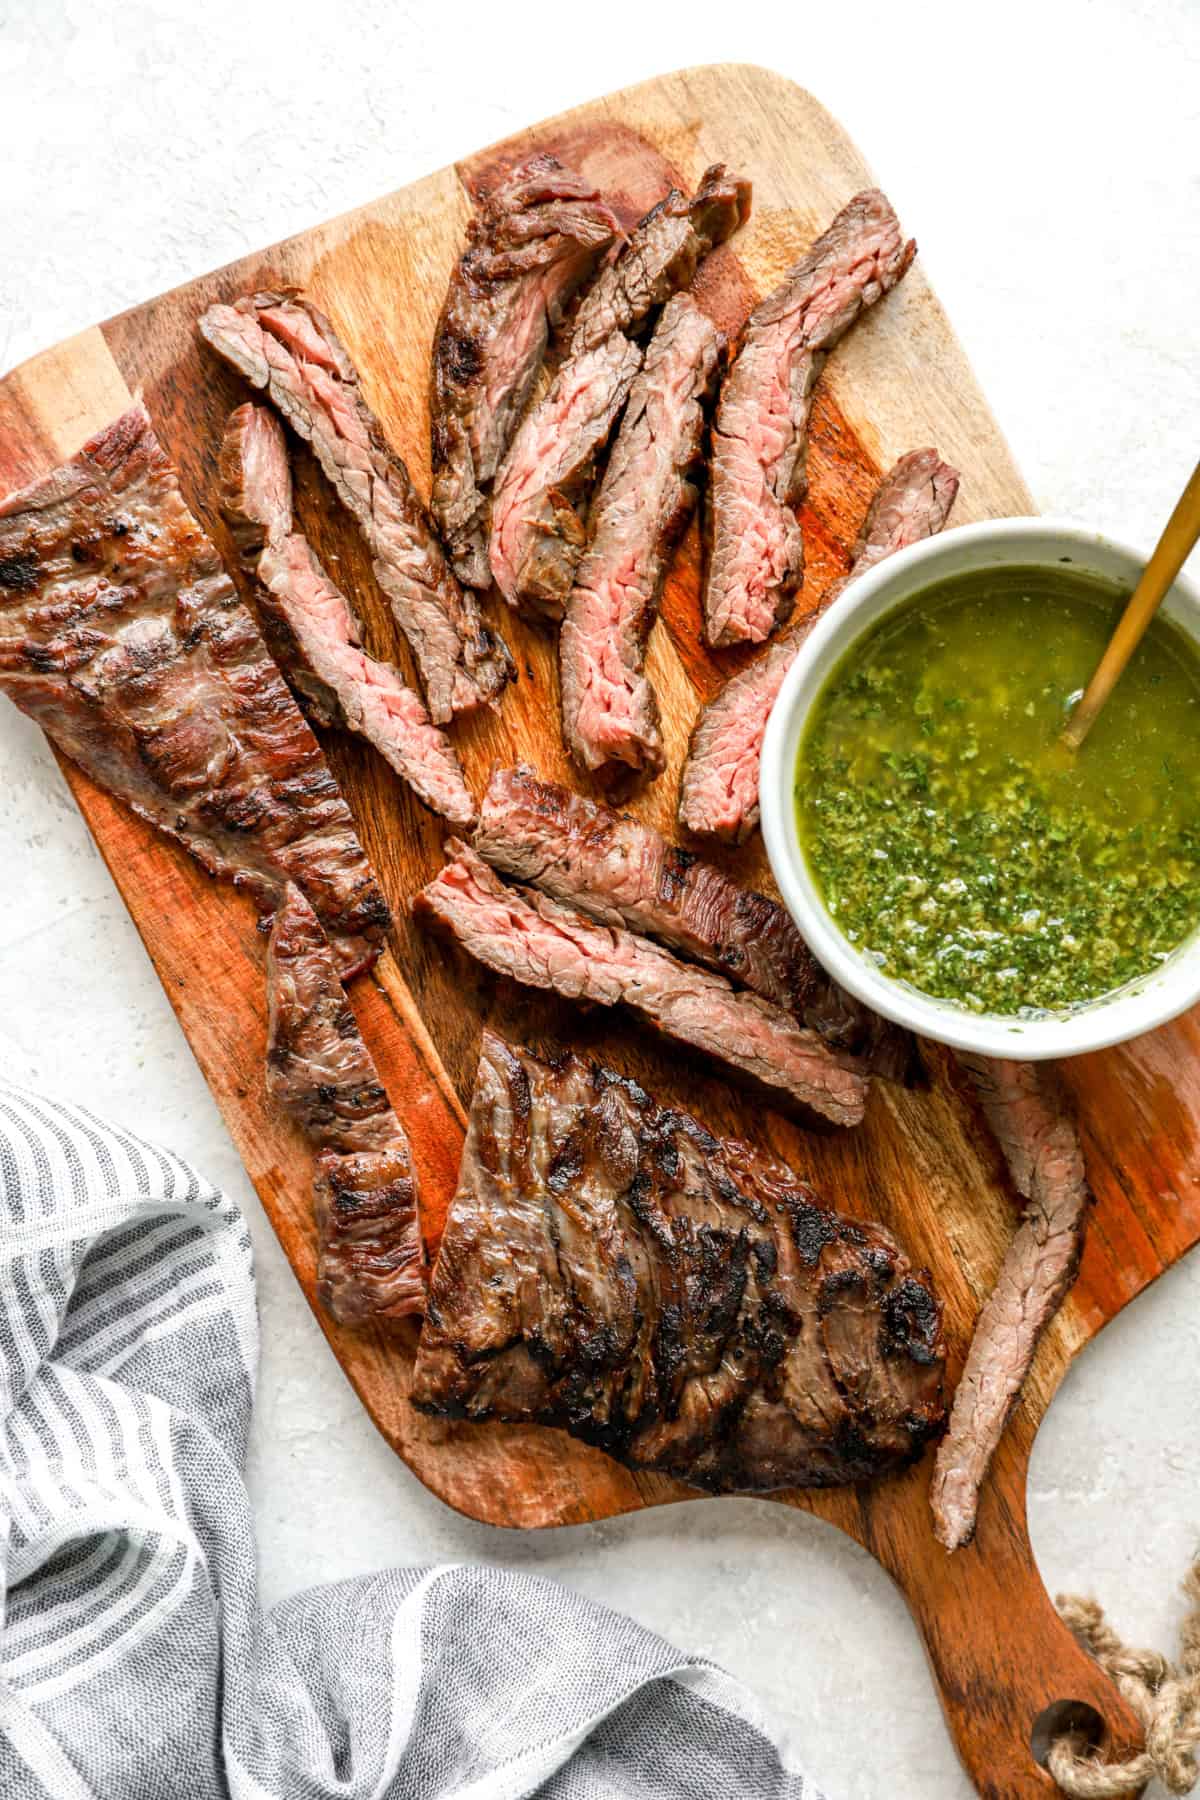 Sliced skirt steak pieces on a wooden cutting board next to a bowl of salsa verde. 